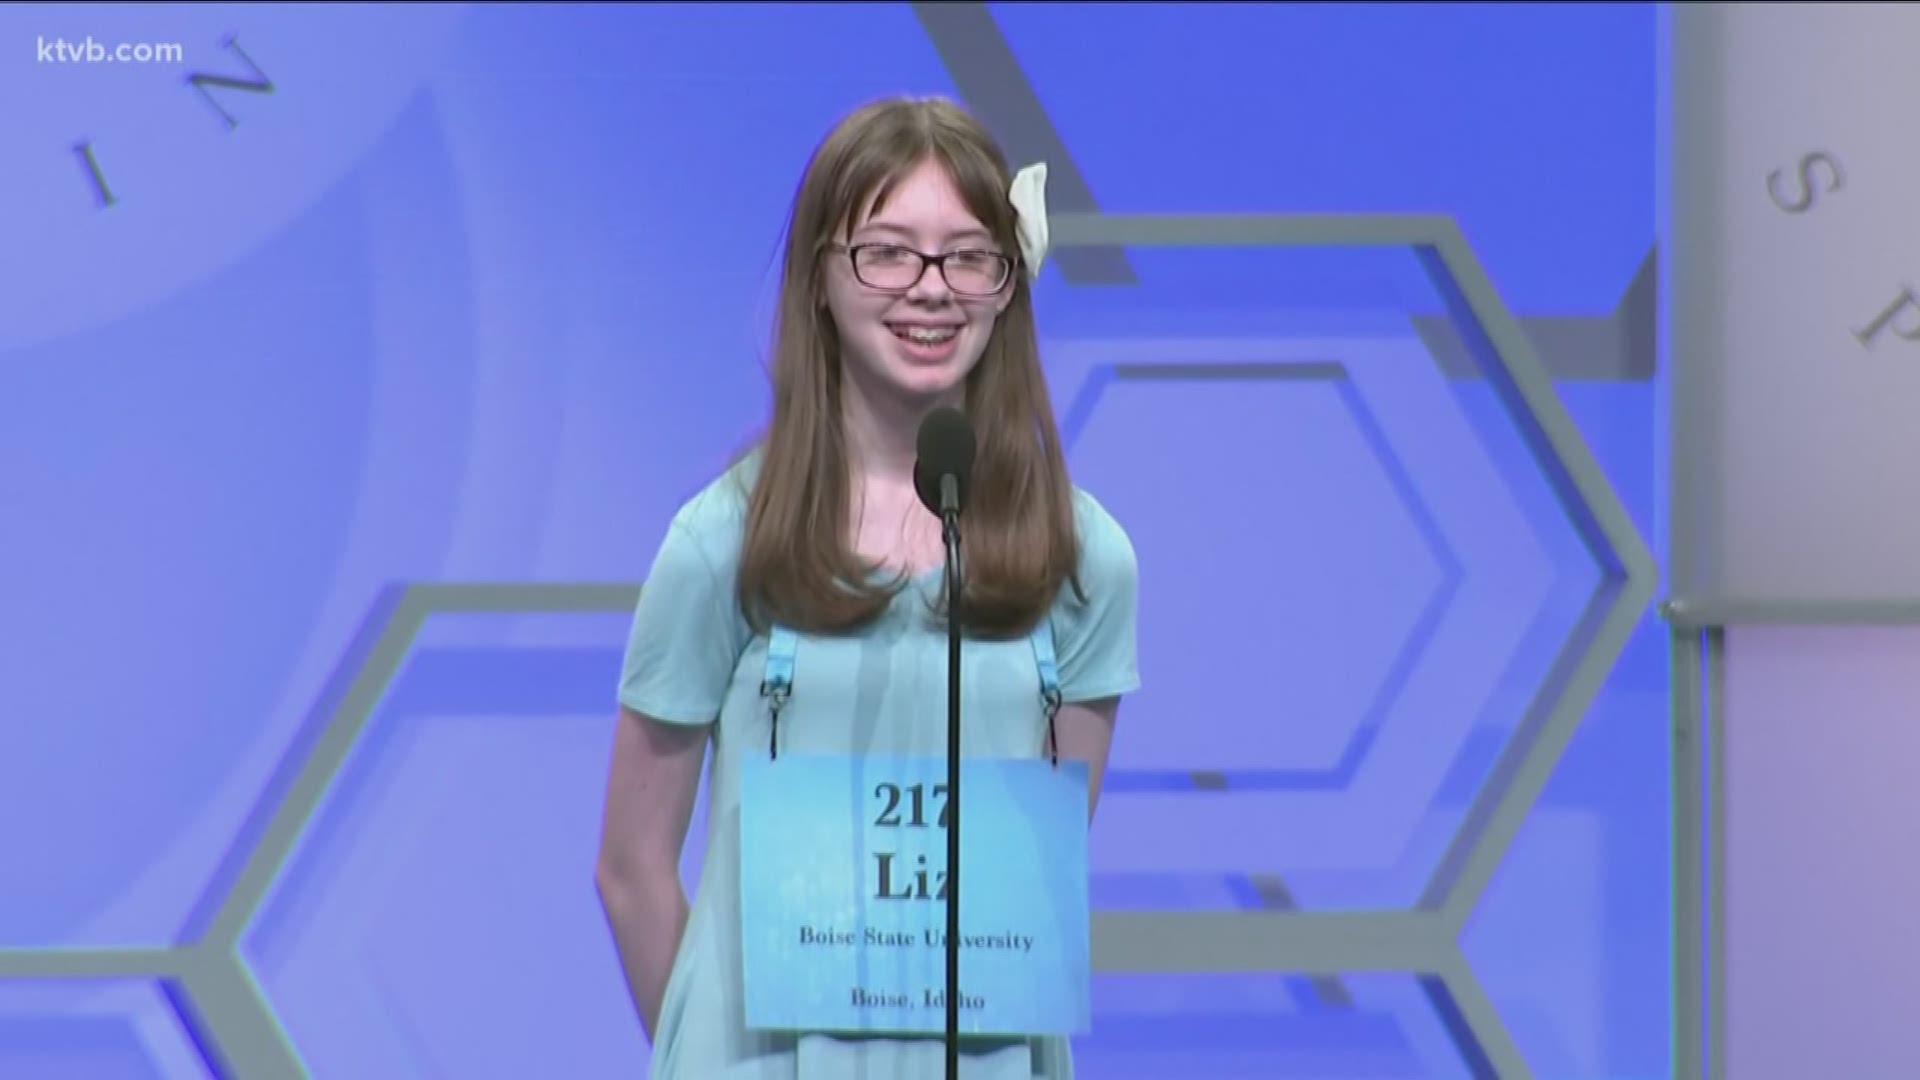 2018 Scripps National Spelling Bee: What to Watch for